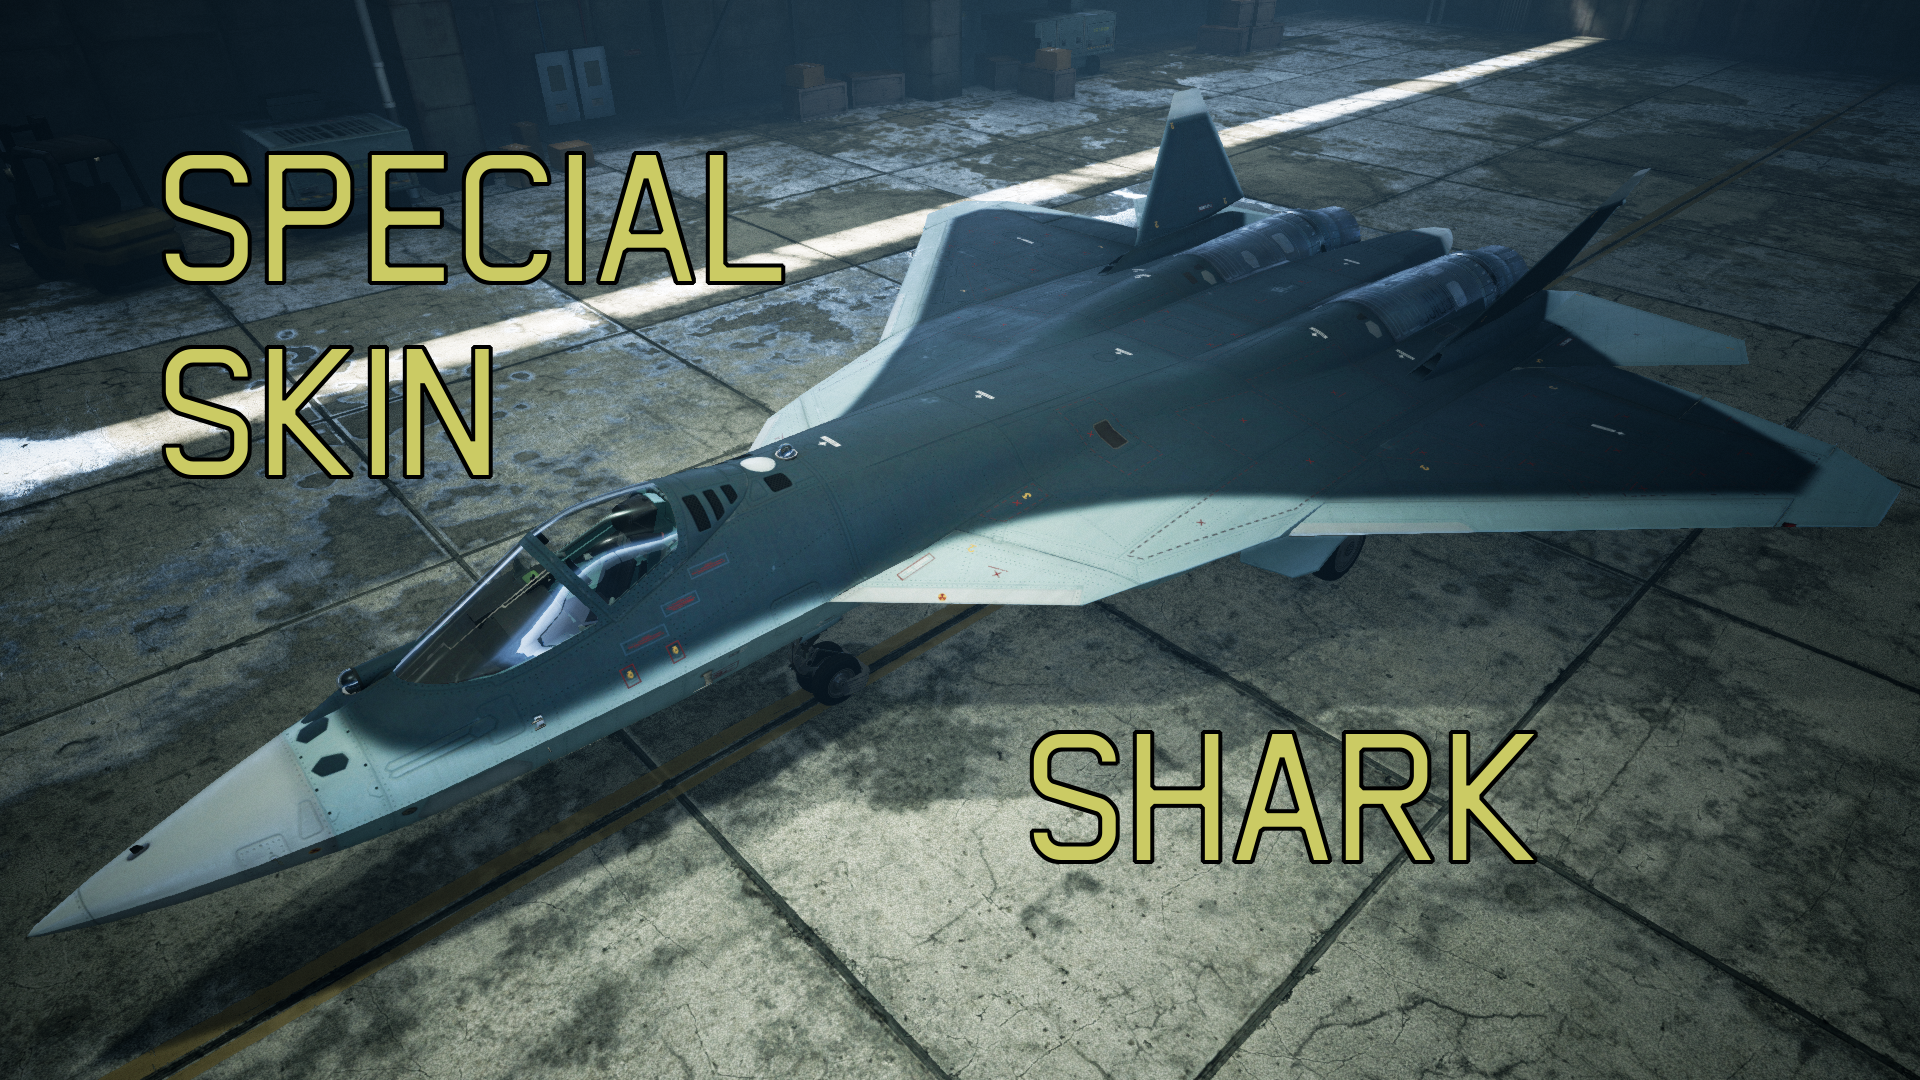 How To Make Skins in Ace Combat 7 